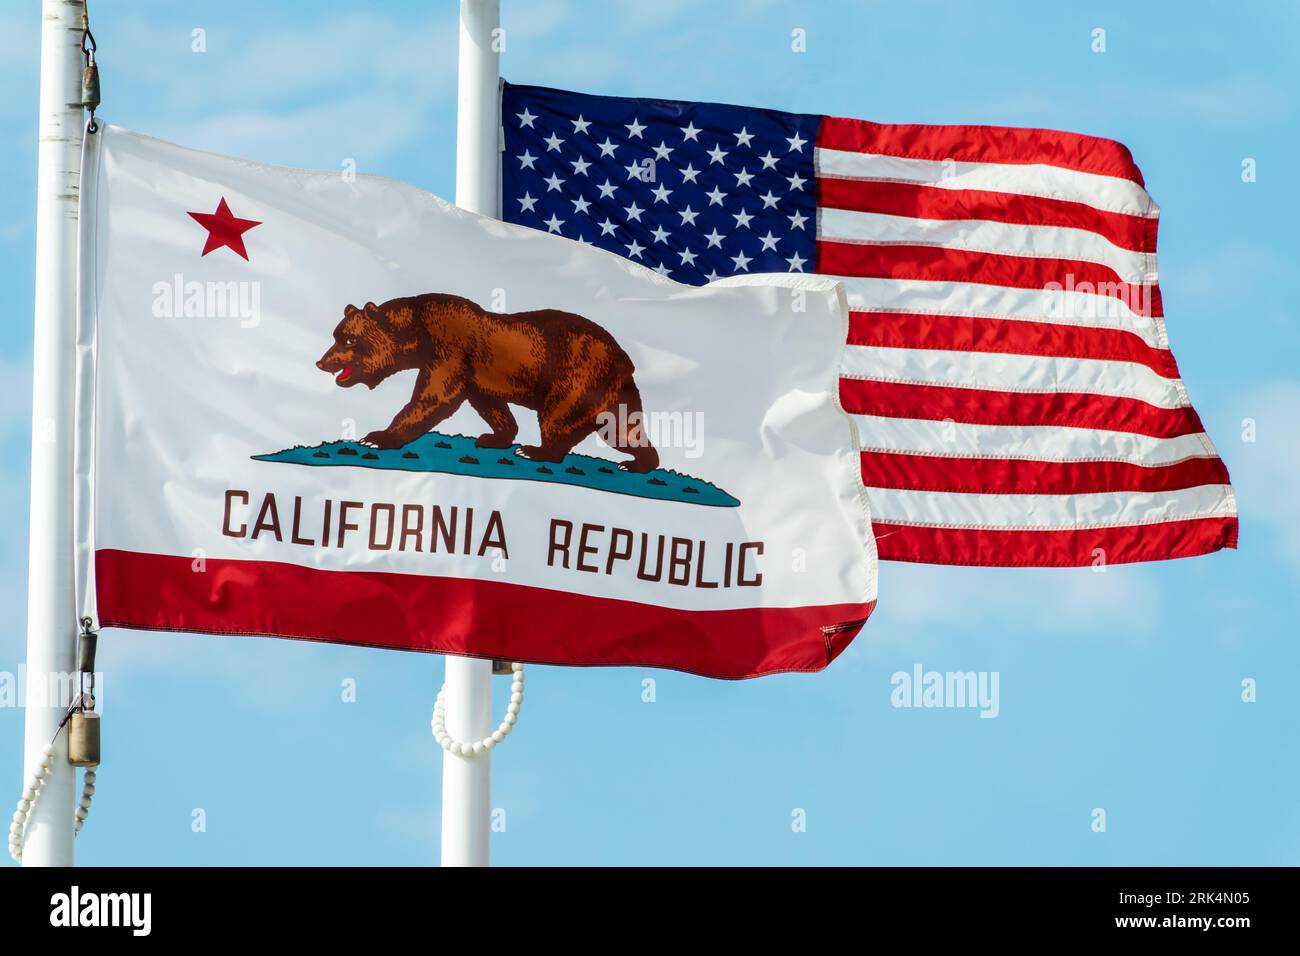 California Republic bear flag and US american flags floating on poles side by side Stock Photo